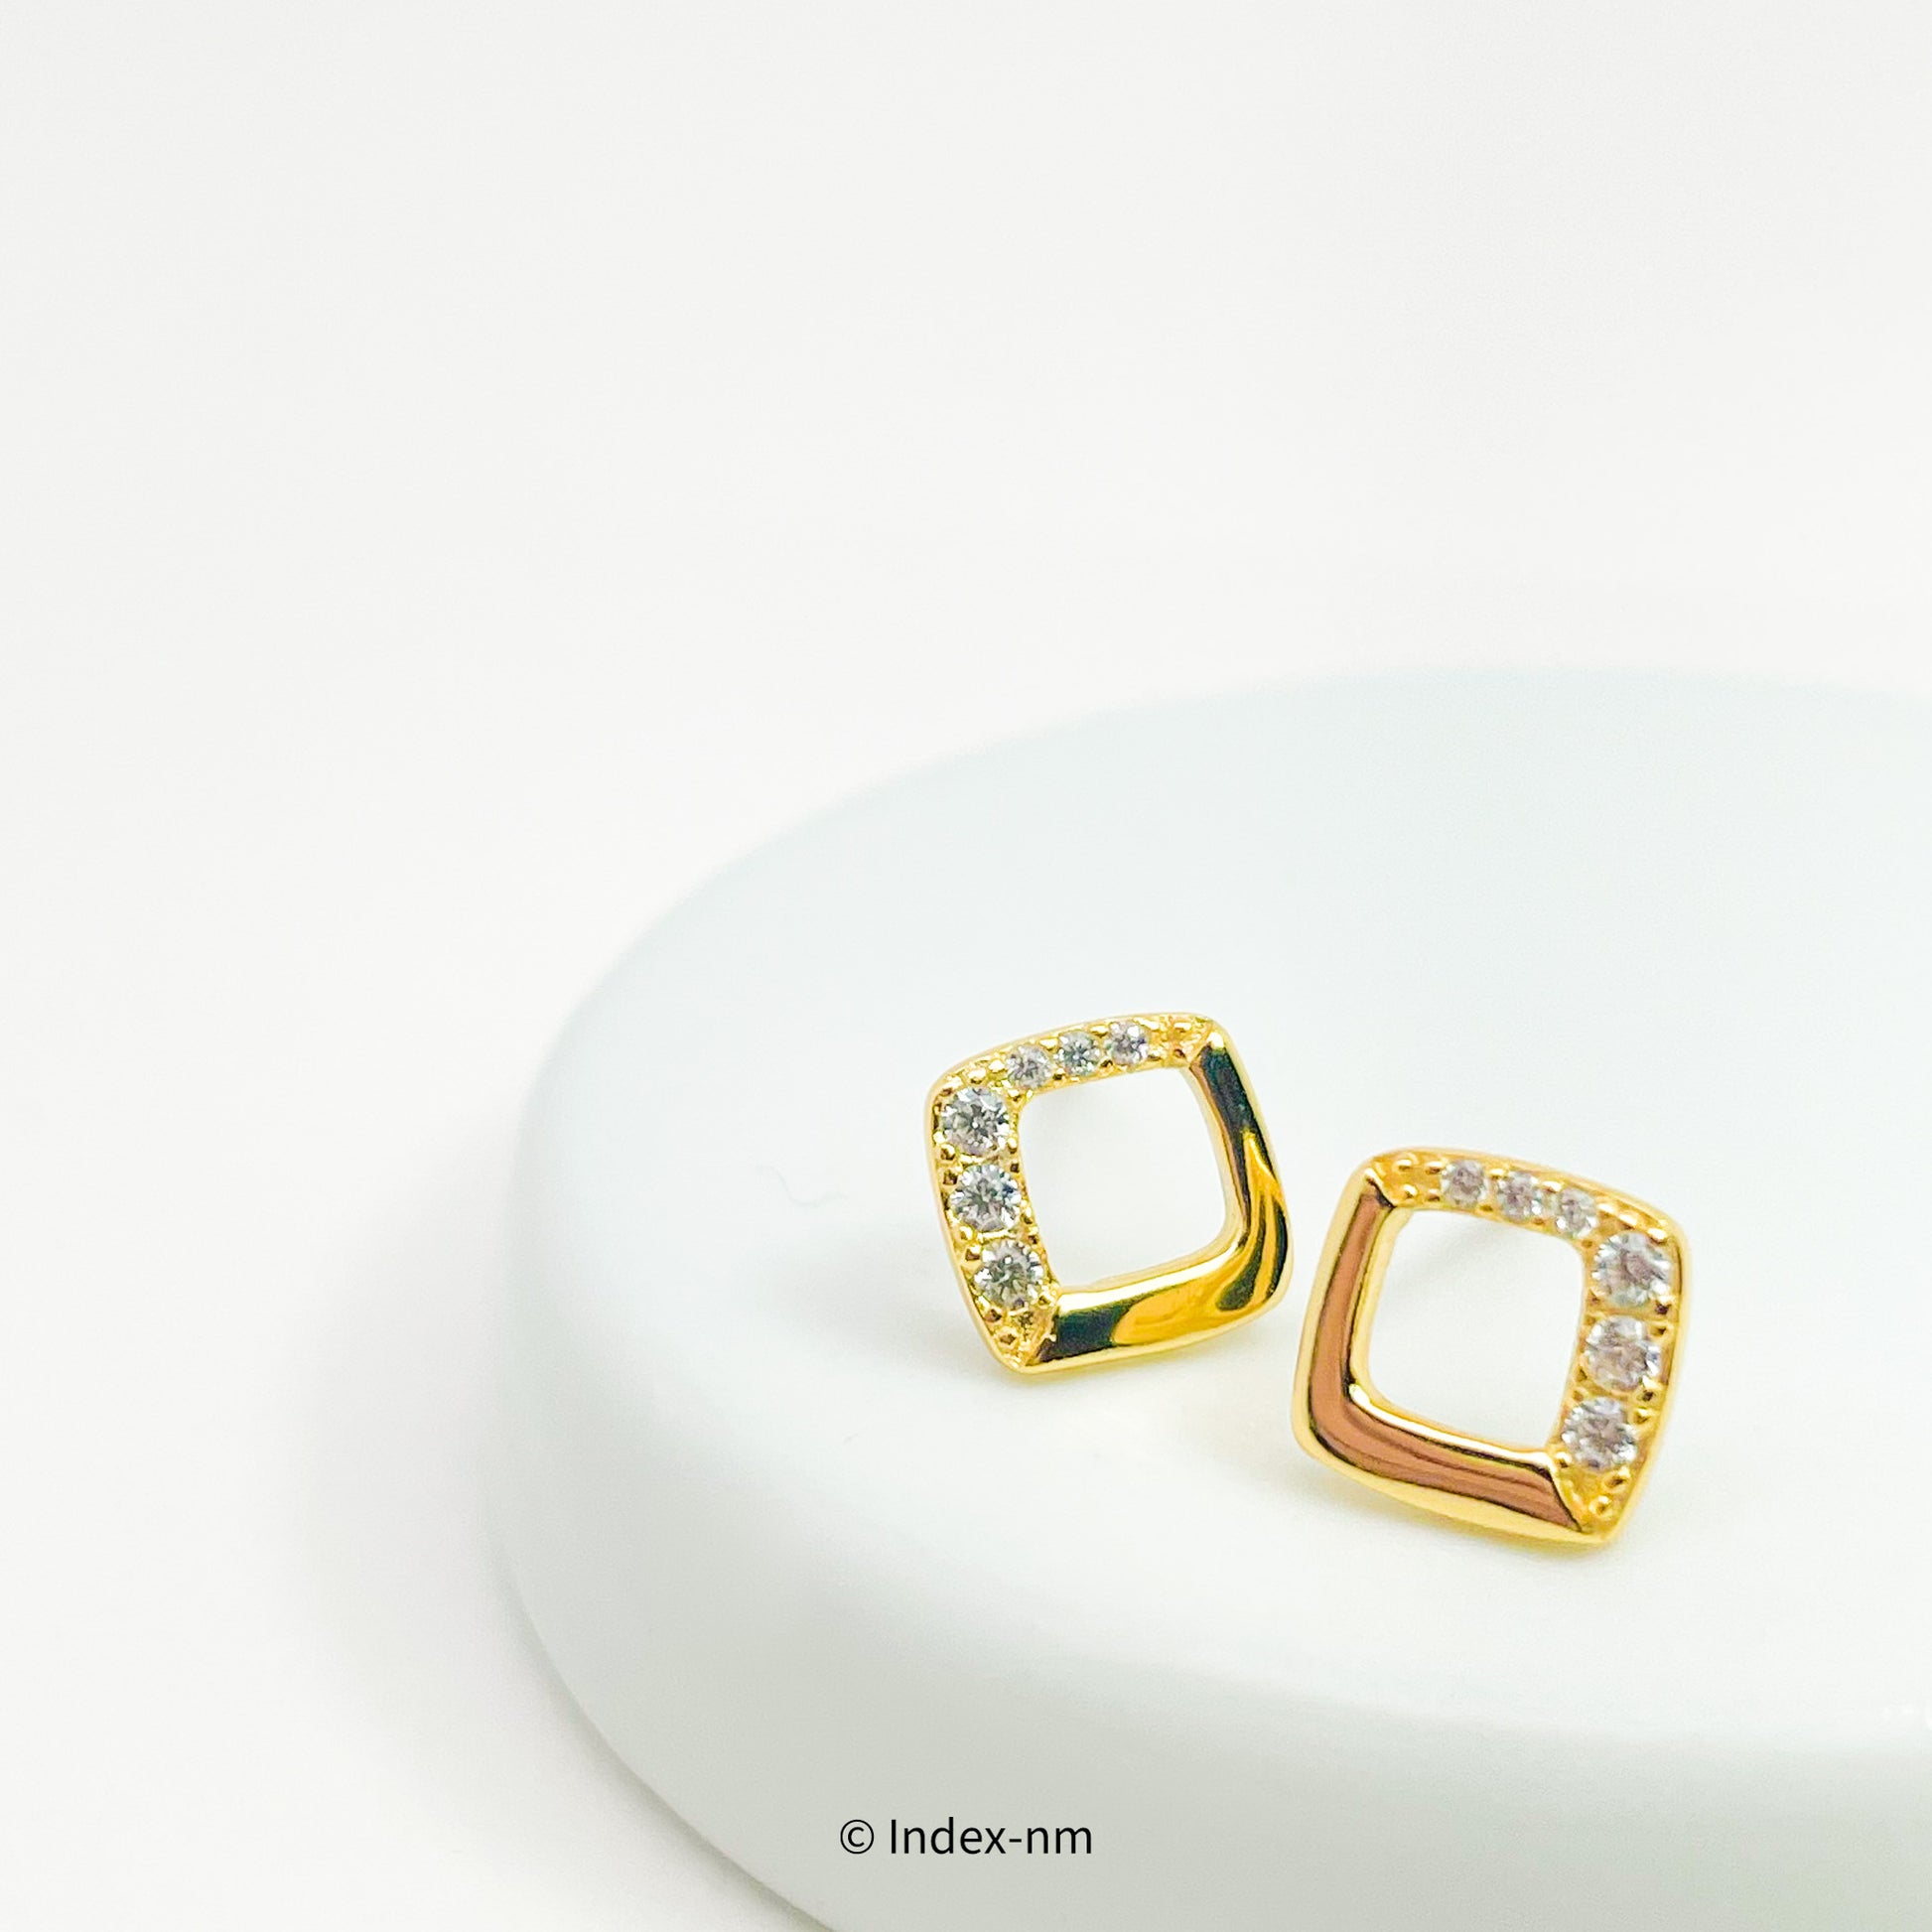 Sterling Silver Gold Square Stud Earrings